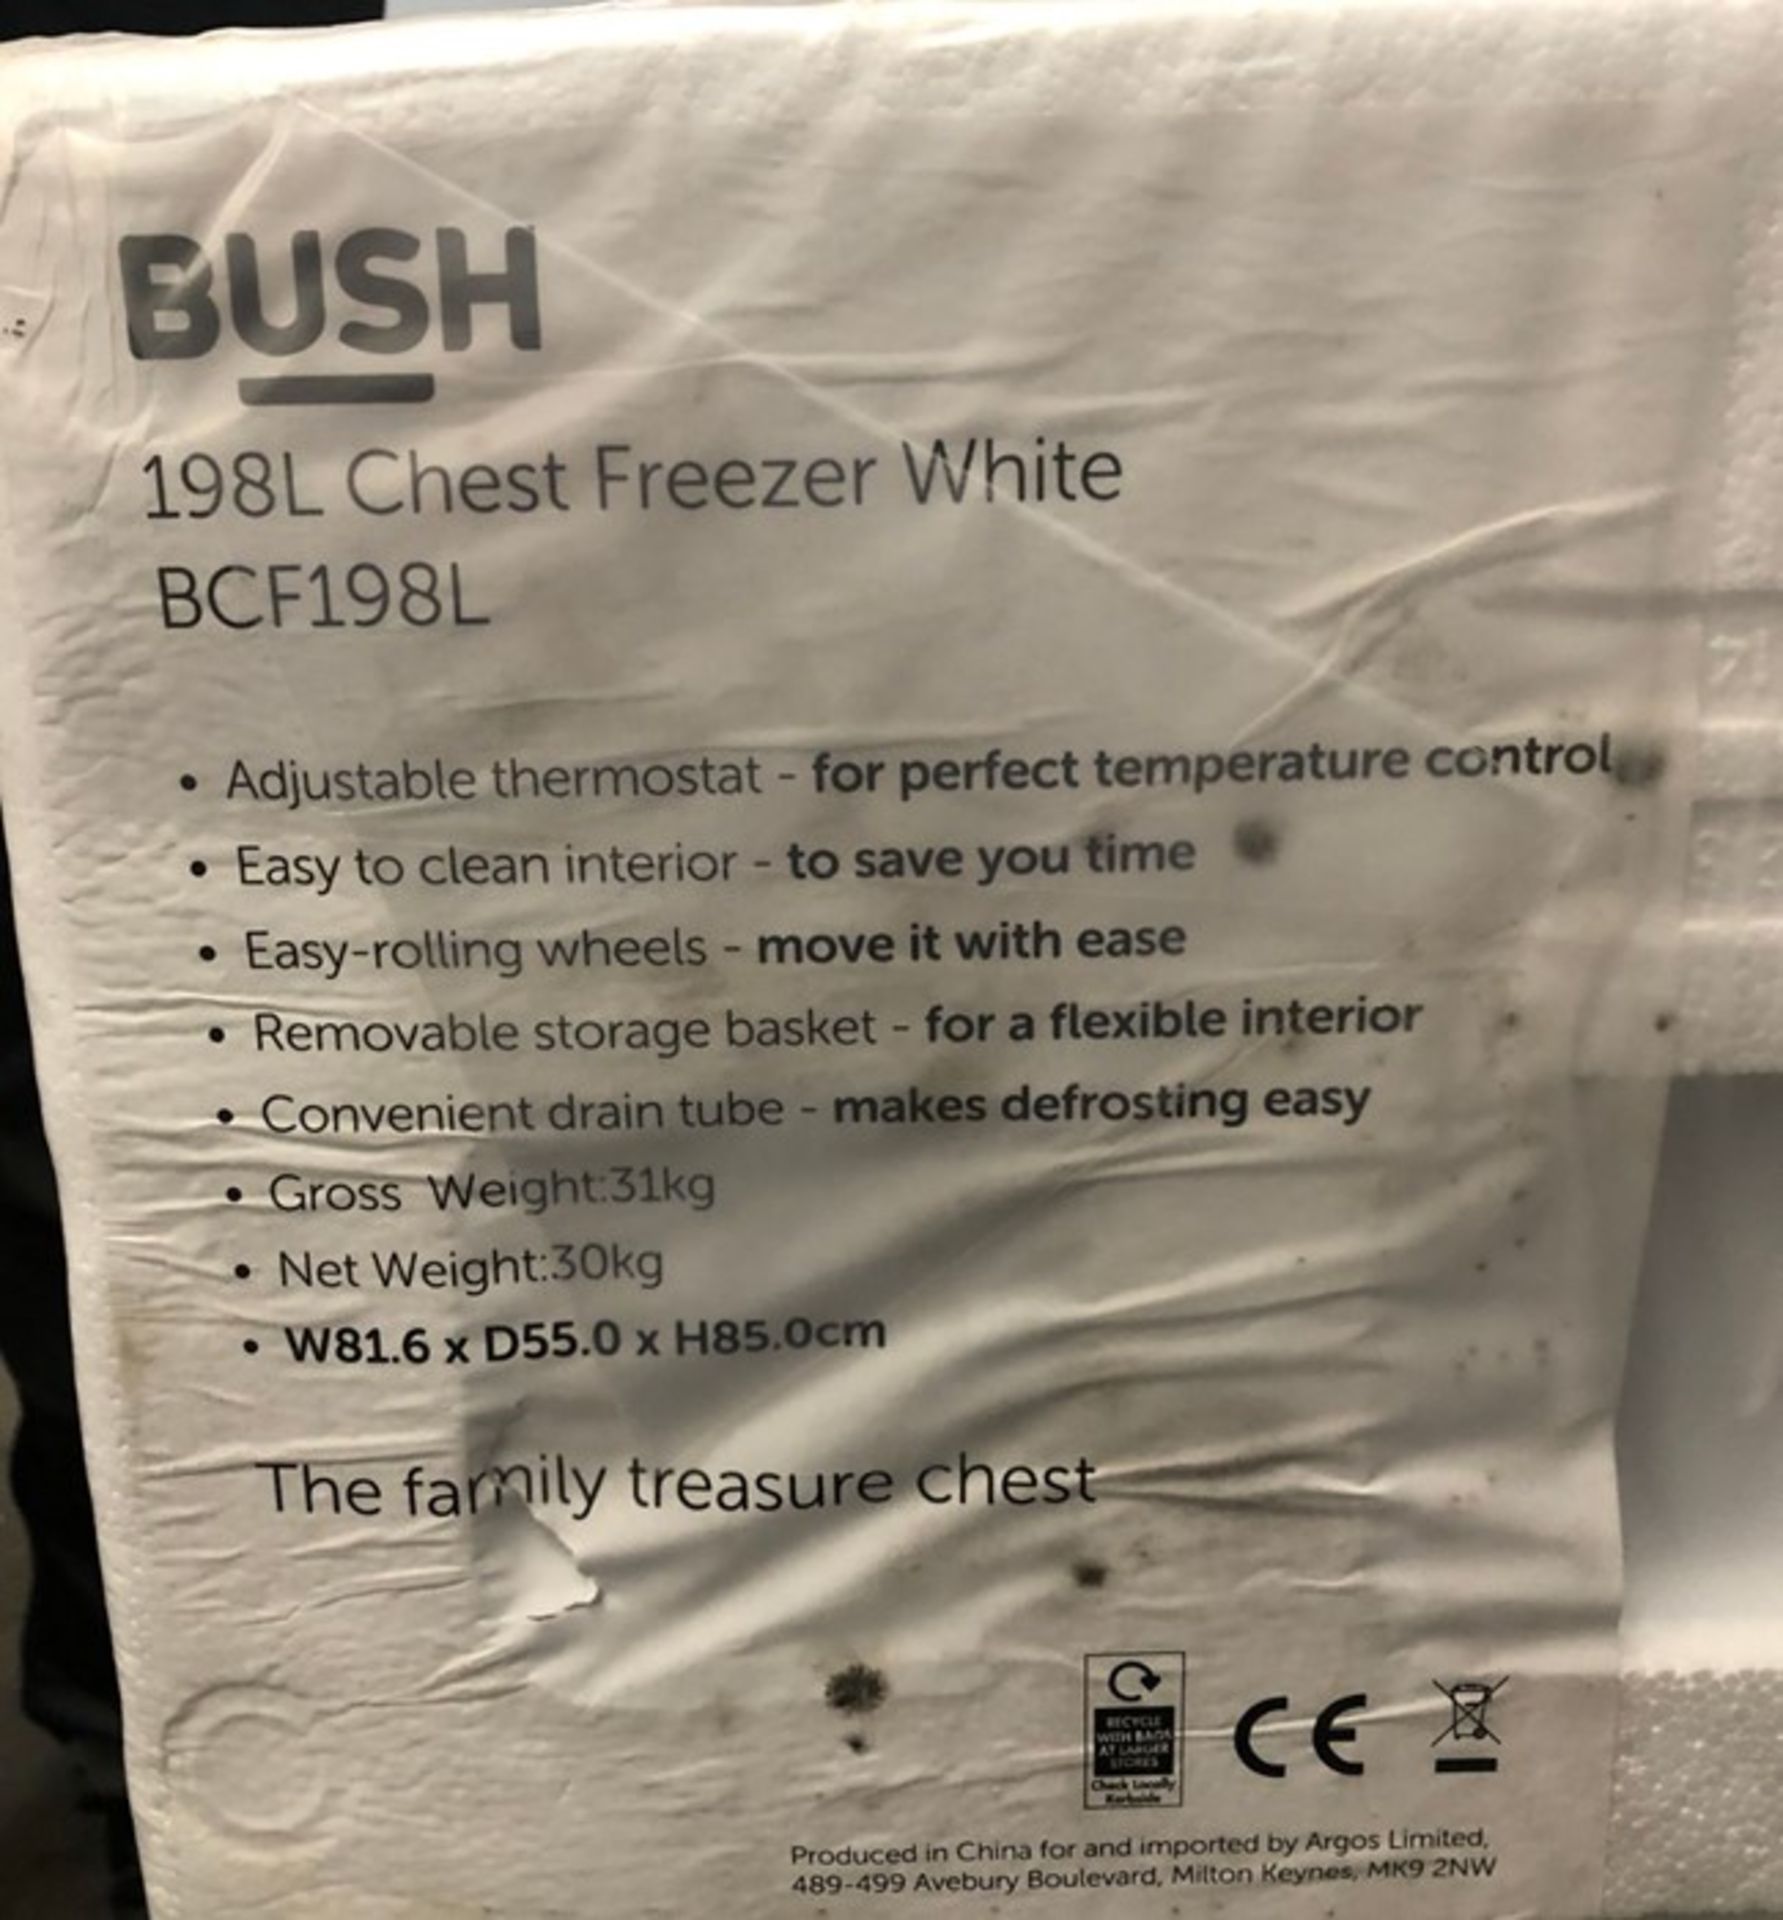 BUSH 198L CHEST FREEZER WHITE - BCF198L / RRP £189.99 / UNTESTED. STILL FACTORY SEALED. NO RIPS OF - Image 2 of 2